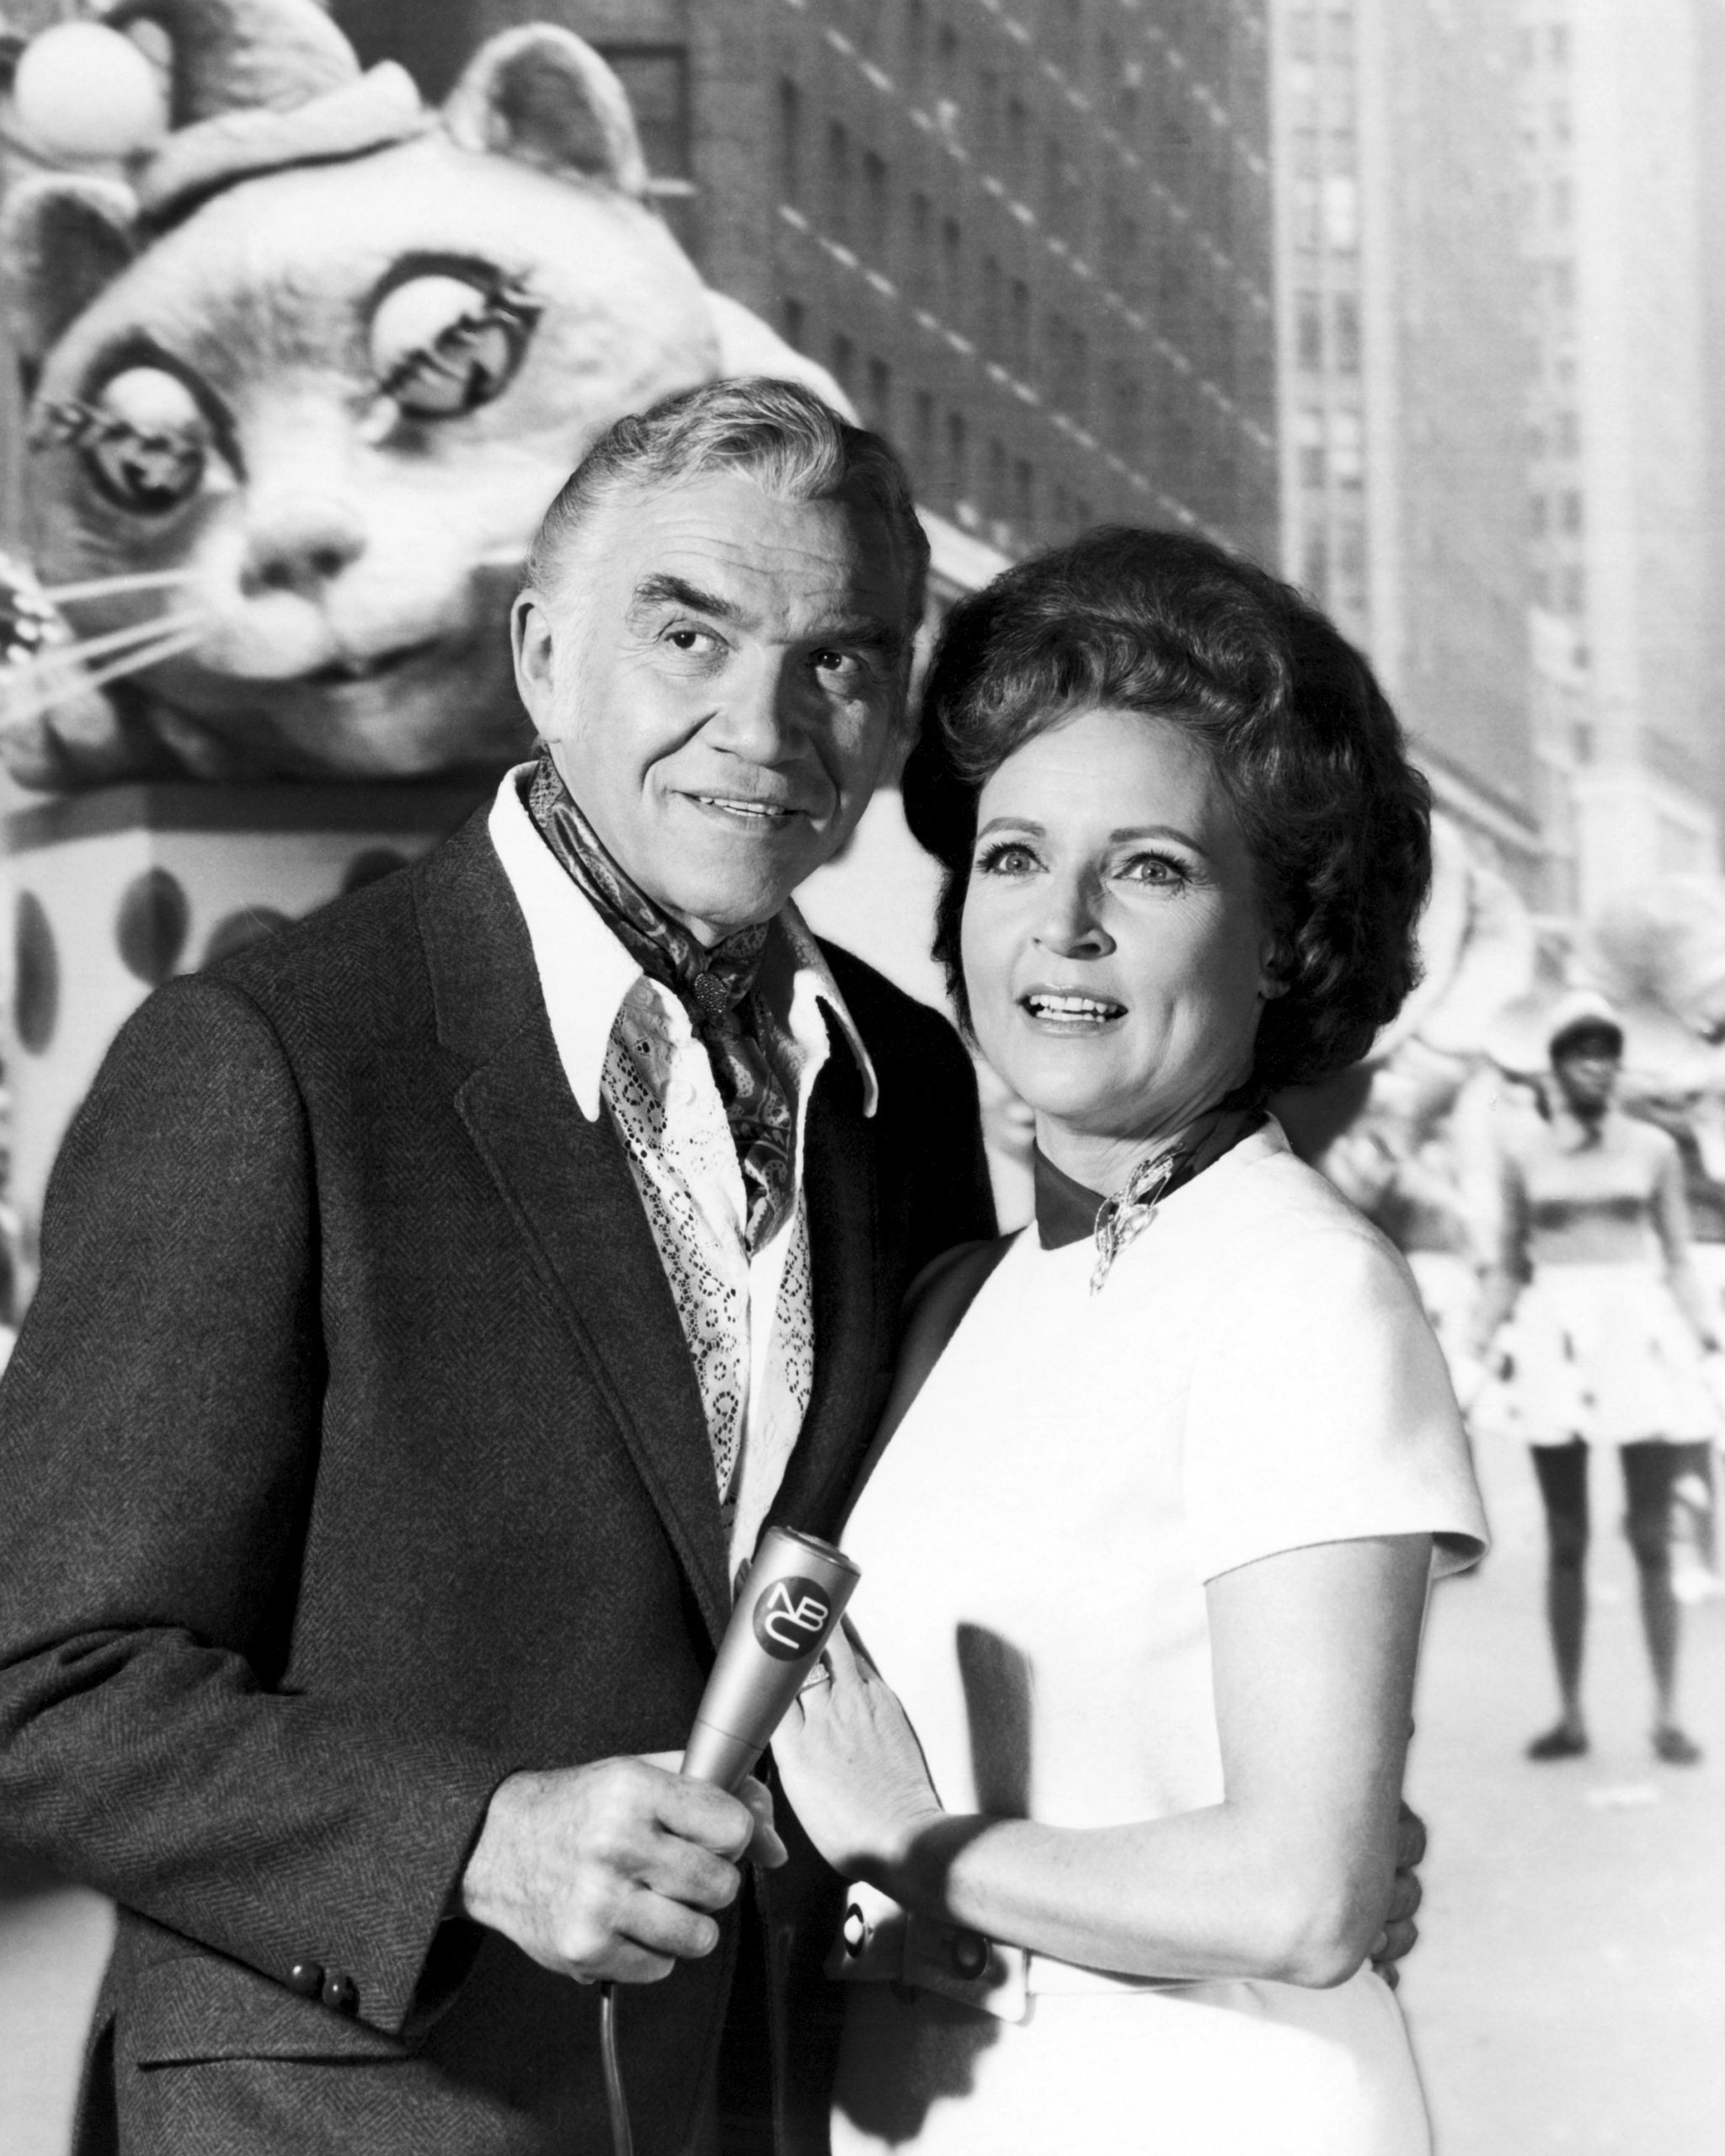 Canadian actor Lorne Greene (1915 - 1987) and American actress Betty White posing for a publicity still, in front of a back projection of a Macy's Thanksgiving Parade, 1969.